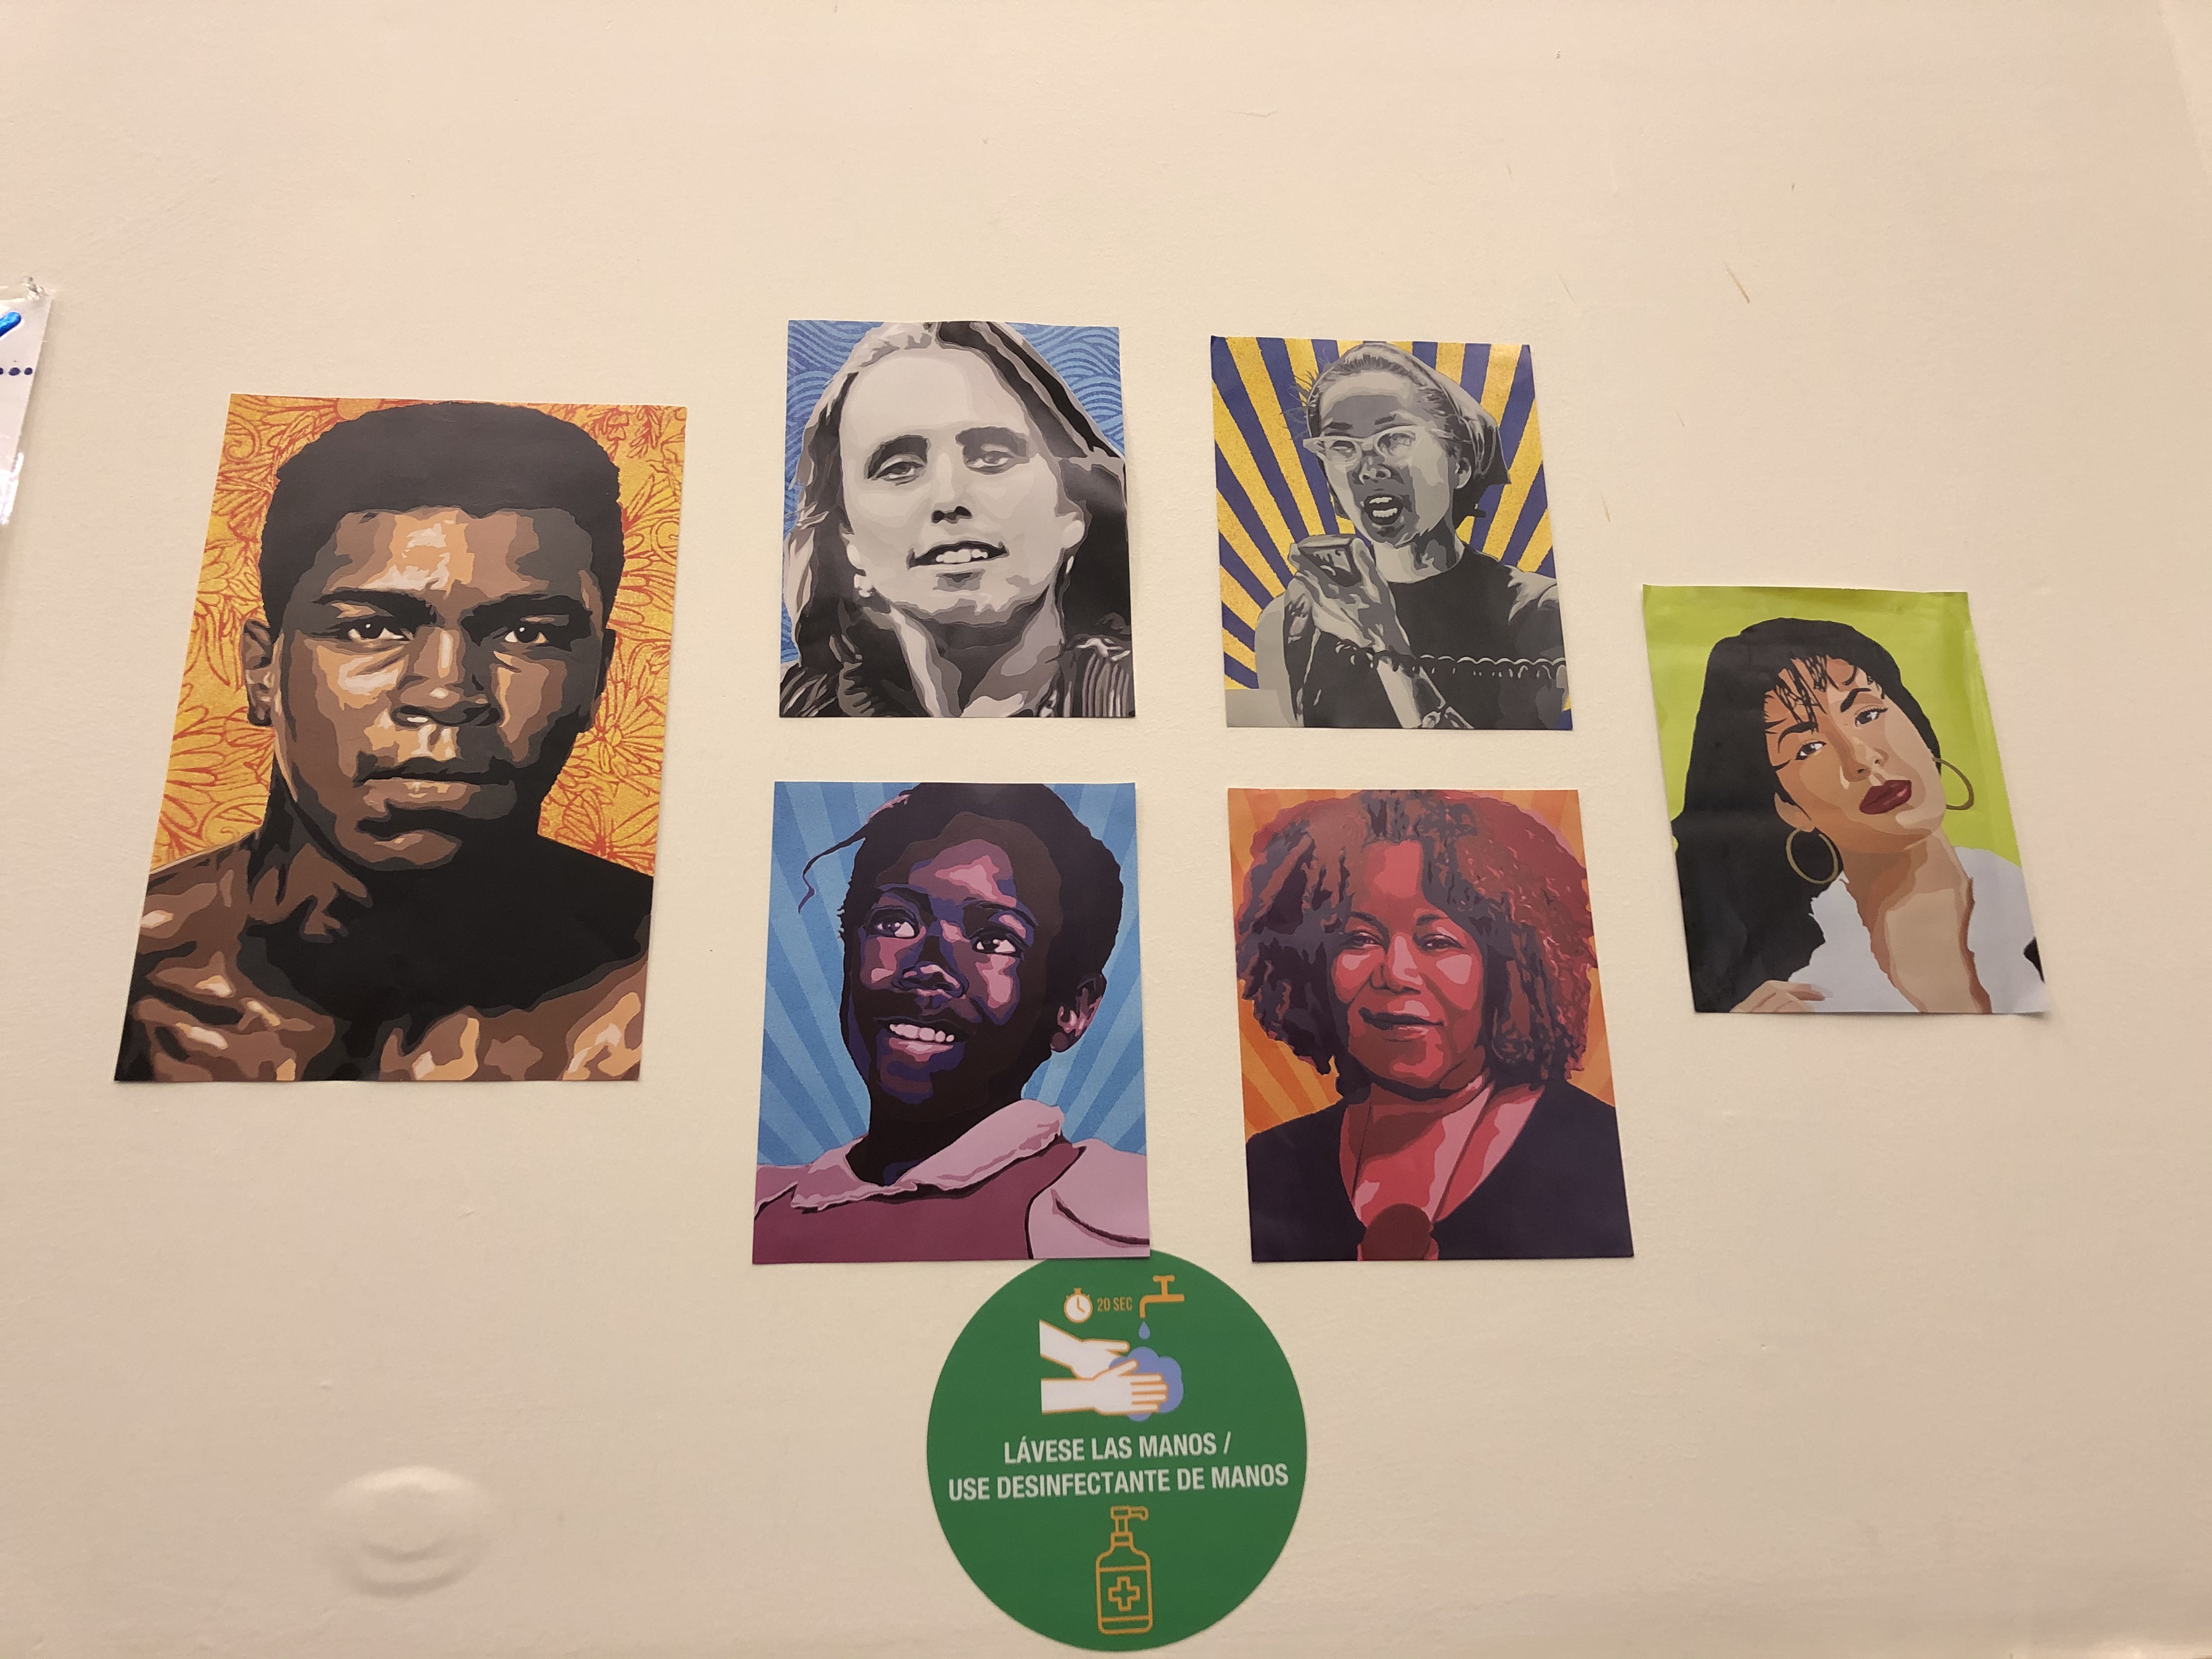 A wall with photos of various iconic people of color including Muhammad Ali and Yuri Kochiyama.